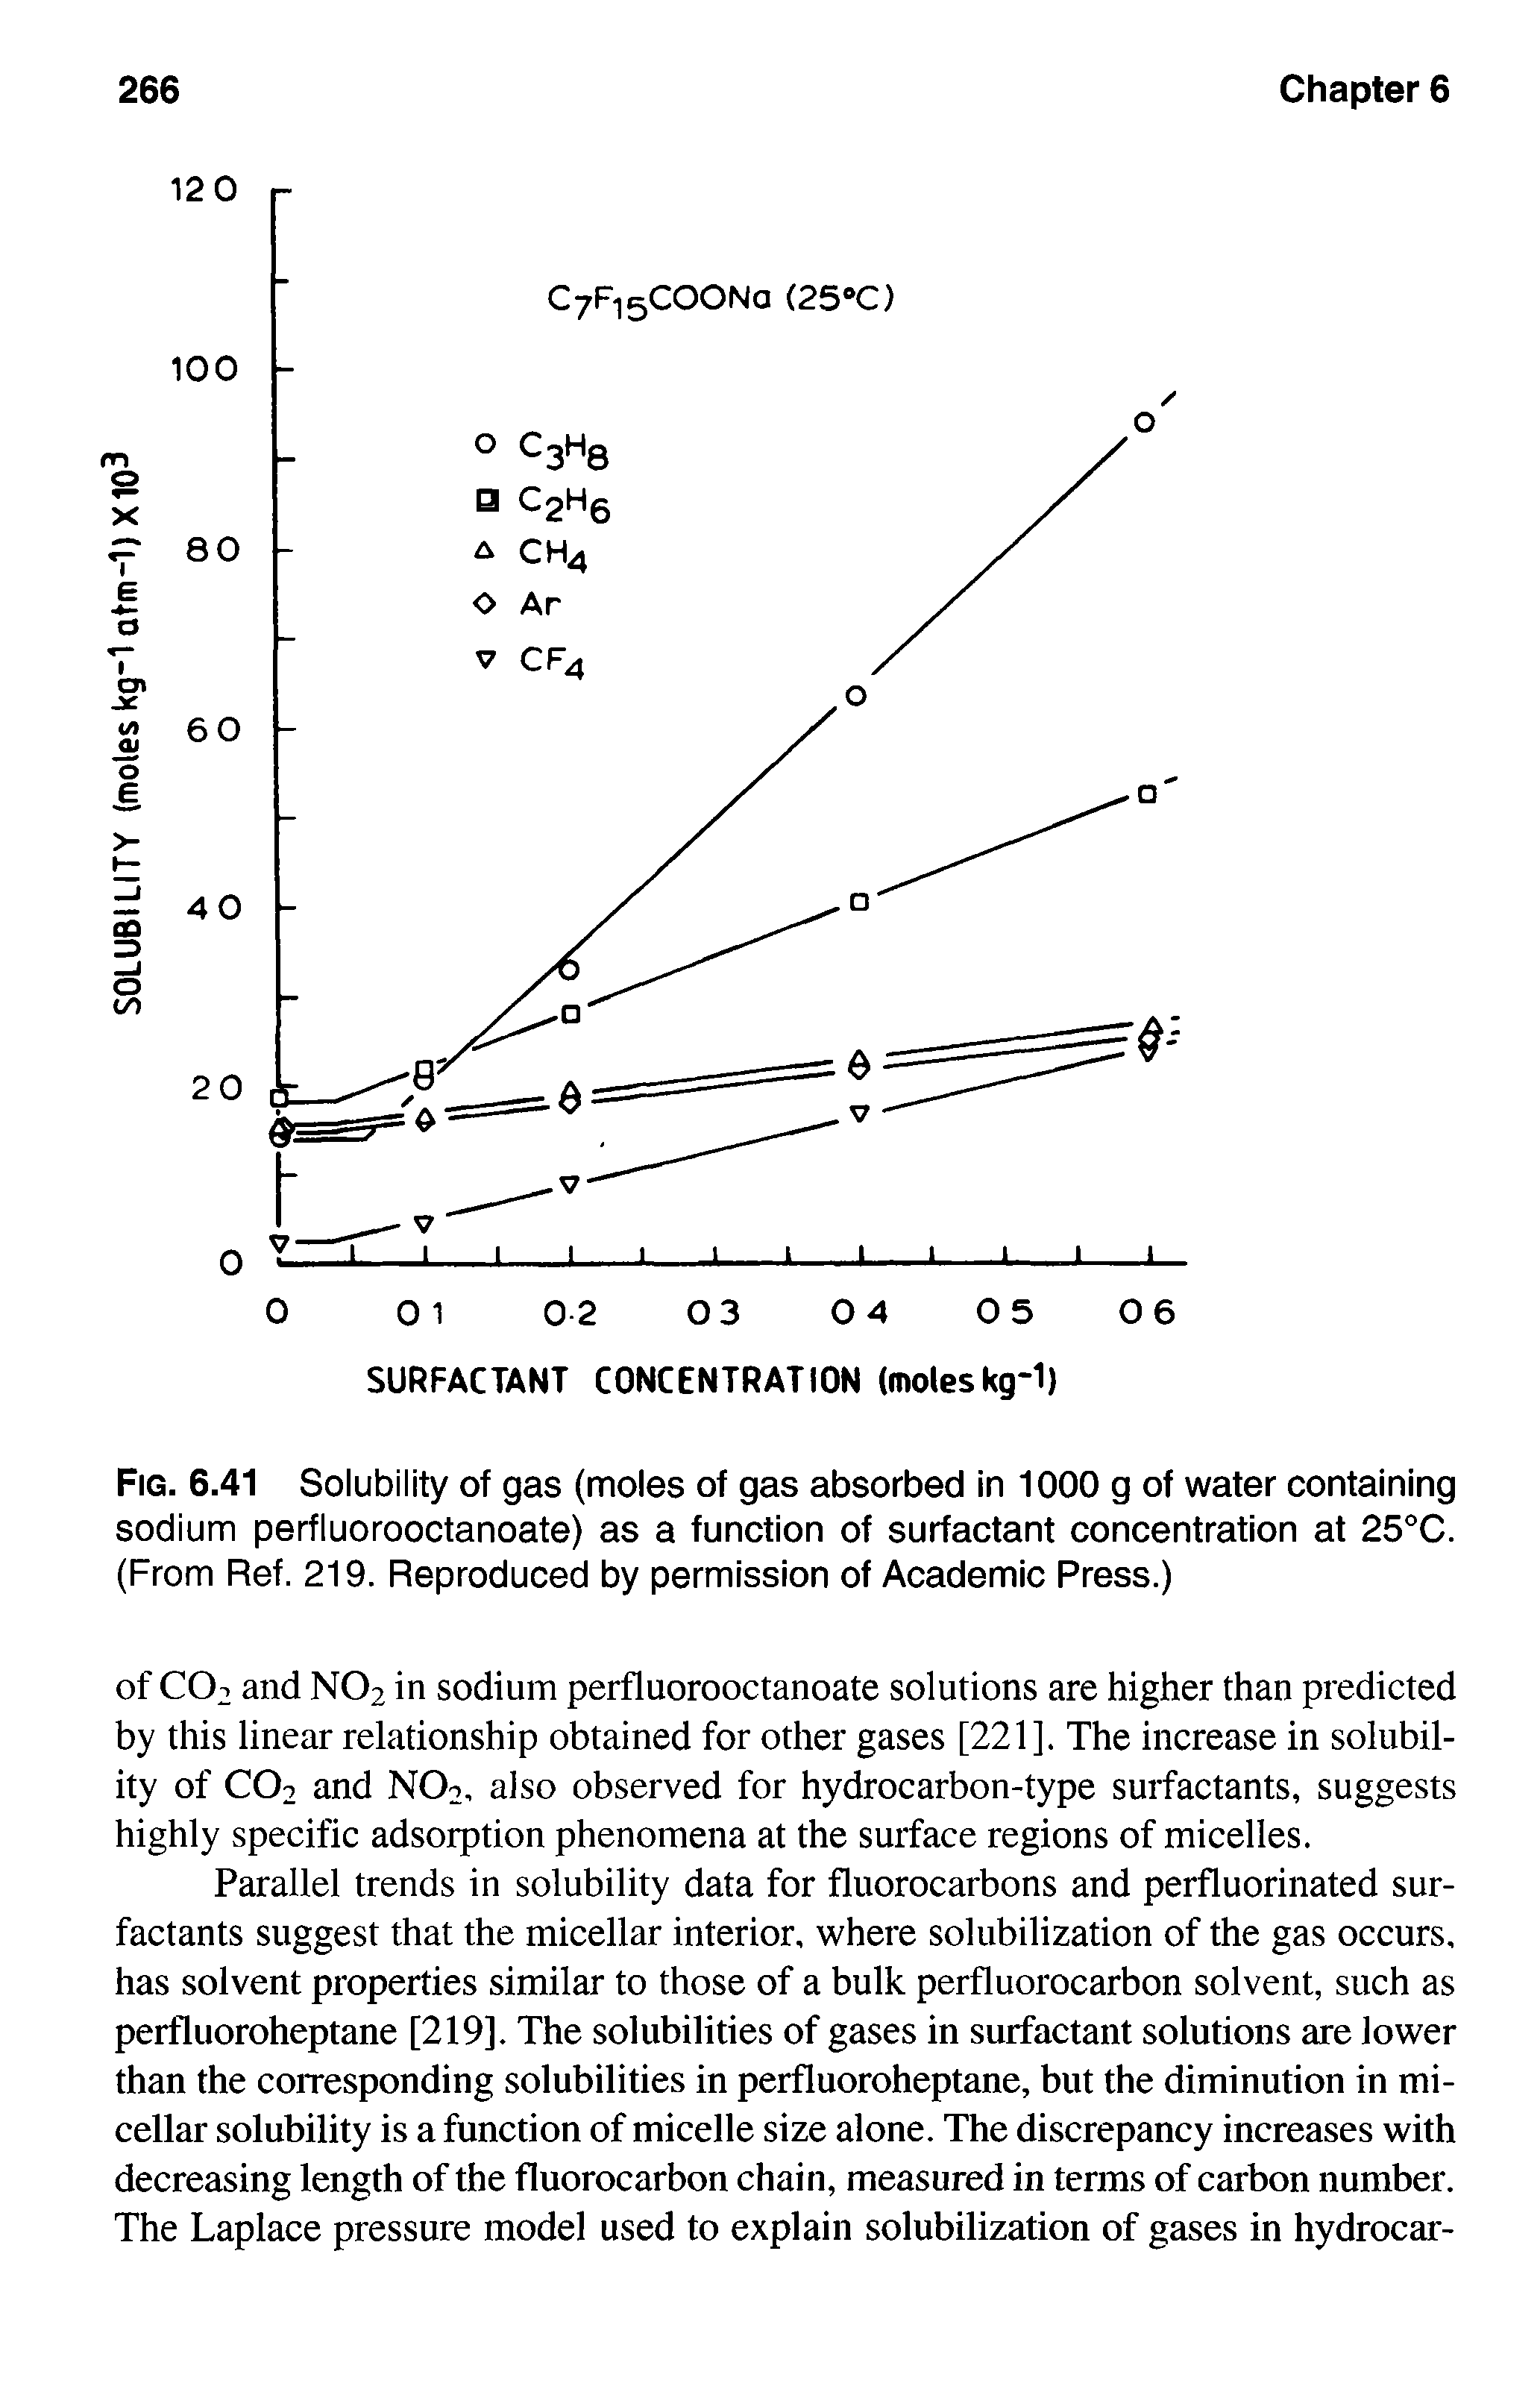 Fig. 6.41 Solubility of gas (moles of gas absorbed in 1000 g of water containing sodium perfluorooctanoate) as a function of surfactant concentration at 25°C. (From Ref. 219. Reproduced by permission of Academic Press.)...